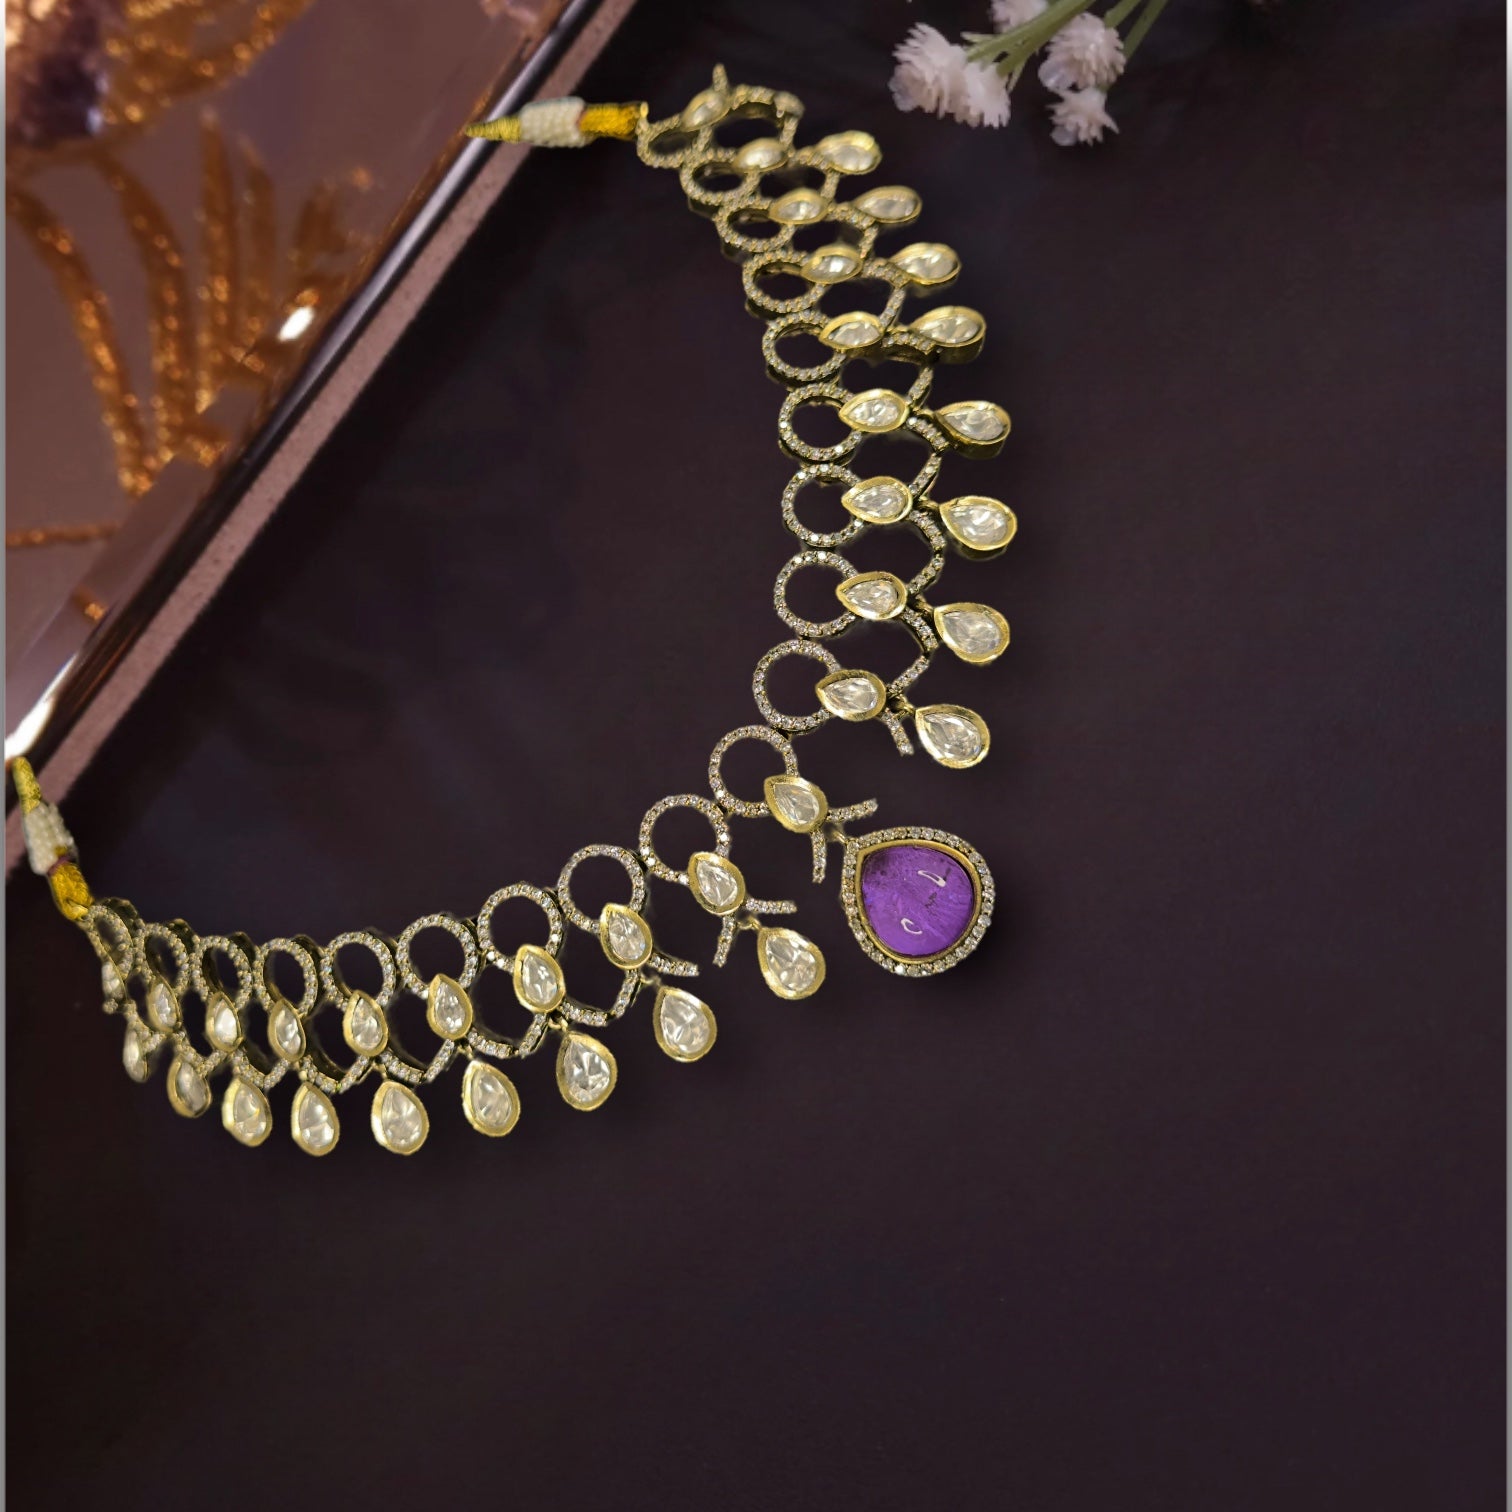 Beautiful Victorian Necklace Set with zircon,and moissanite polki stones,including matching earrings. This Victorian Jewellery is available in Red,Green & Purple colour variants. 